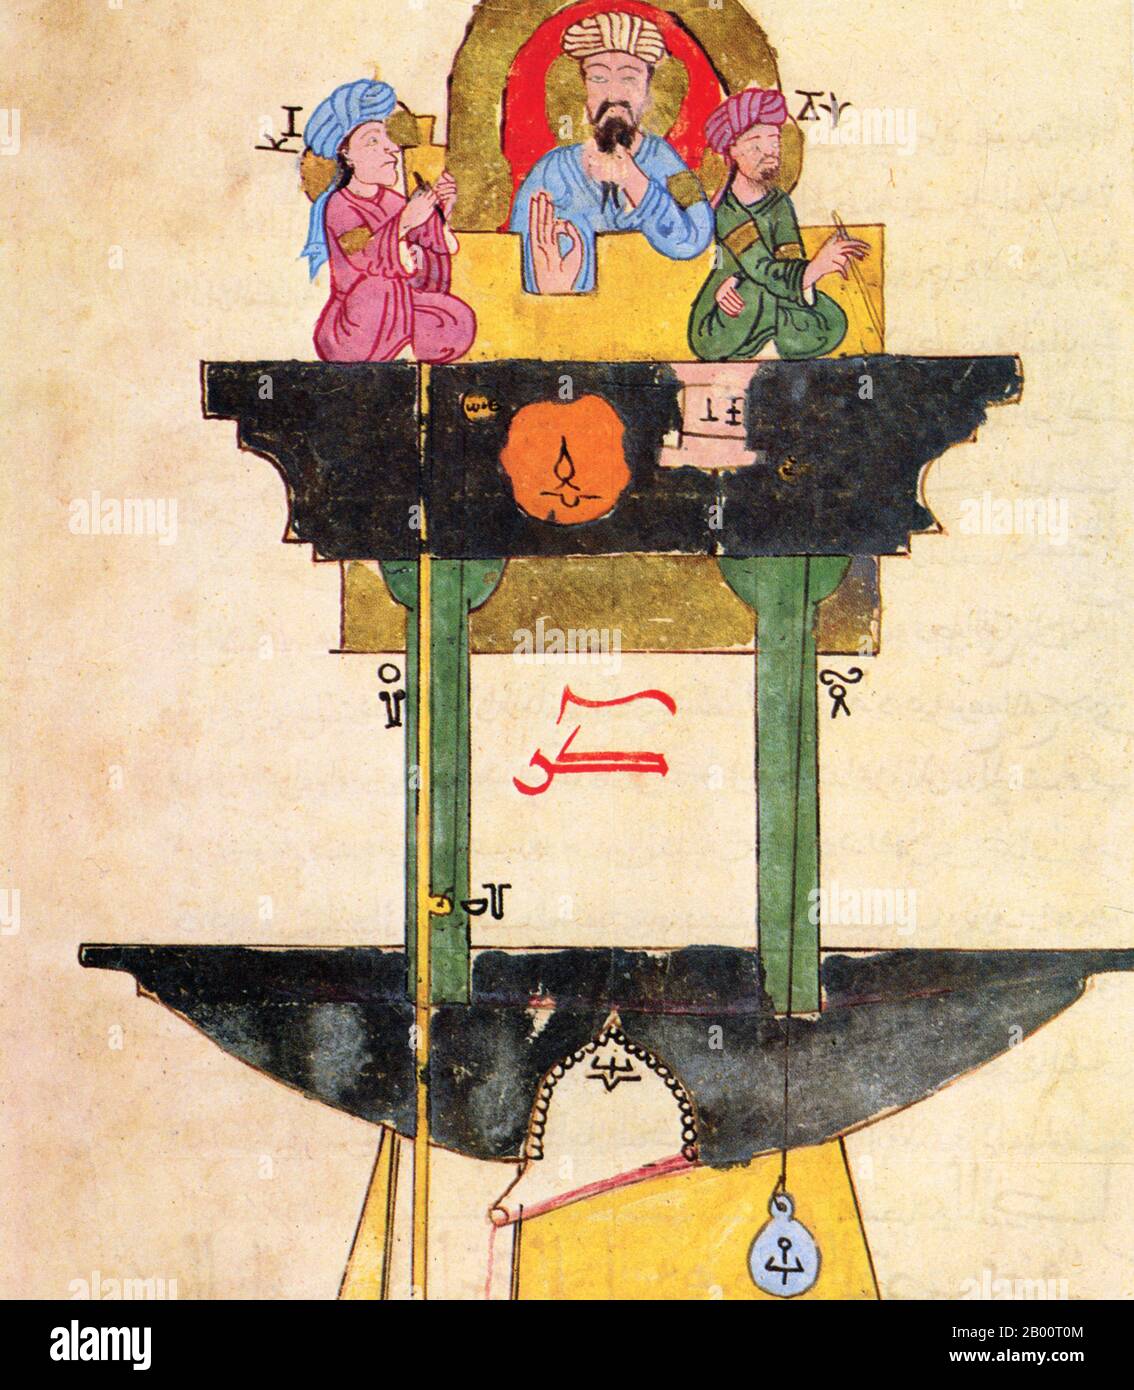 Iraq: Illustration from Al Jazari's 'Book of Knowledge of Ingenious Mechanical Devices', 1206.  Little is known about Al-Jazari, and most of that comes from the introduction to his ‘Book of Knowledge of Ingenious Mechanical Devices’ (Kitab fi ma'rifat al-hiyal al-handasiyya). He was named after the area in which he was born, Al-Jazira, the traditional Arabic name for what was northern Mesopotamia and what is now northwestern Iraq and northeastern Syria, between the Tigris and the Euphrates. Stock Photo